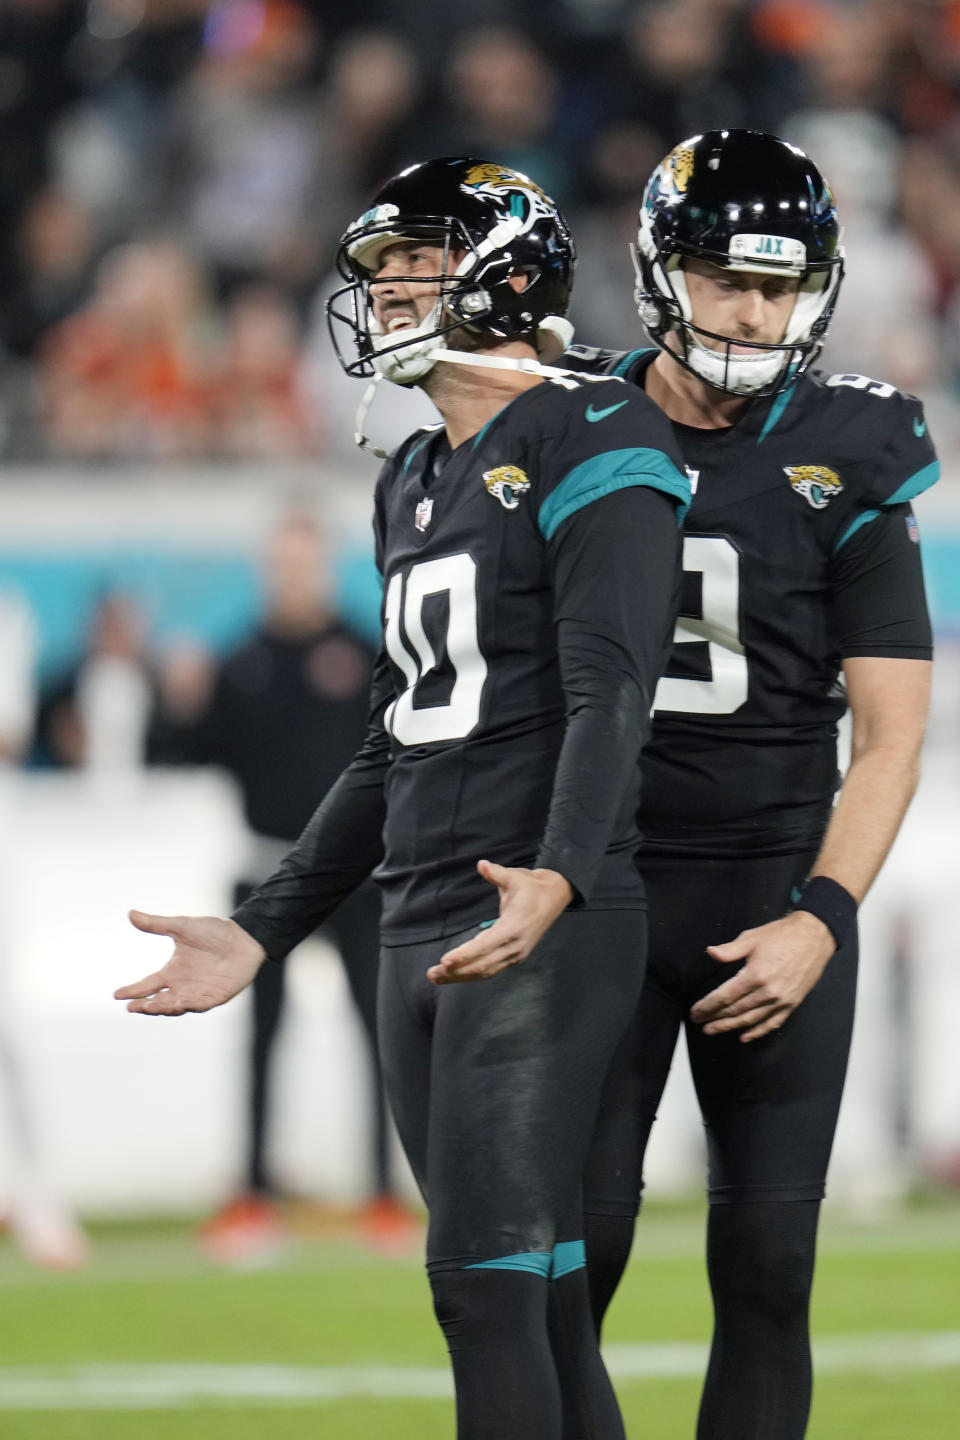 Jacksonville Jaguars place-kicker Brandon McManus (10) reacts after missing a field goal during the second half of an NFL football game against the Cincinnati Bengals, Monday, Dec. 4, 2023, in Jacksonville, Fla. (AP Photo/John Raoux)